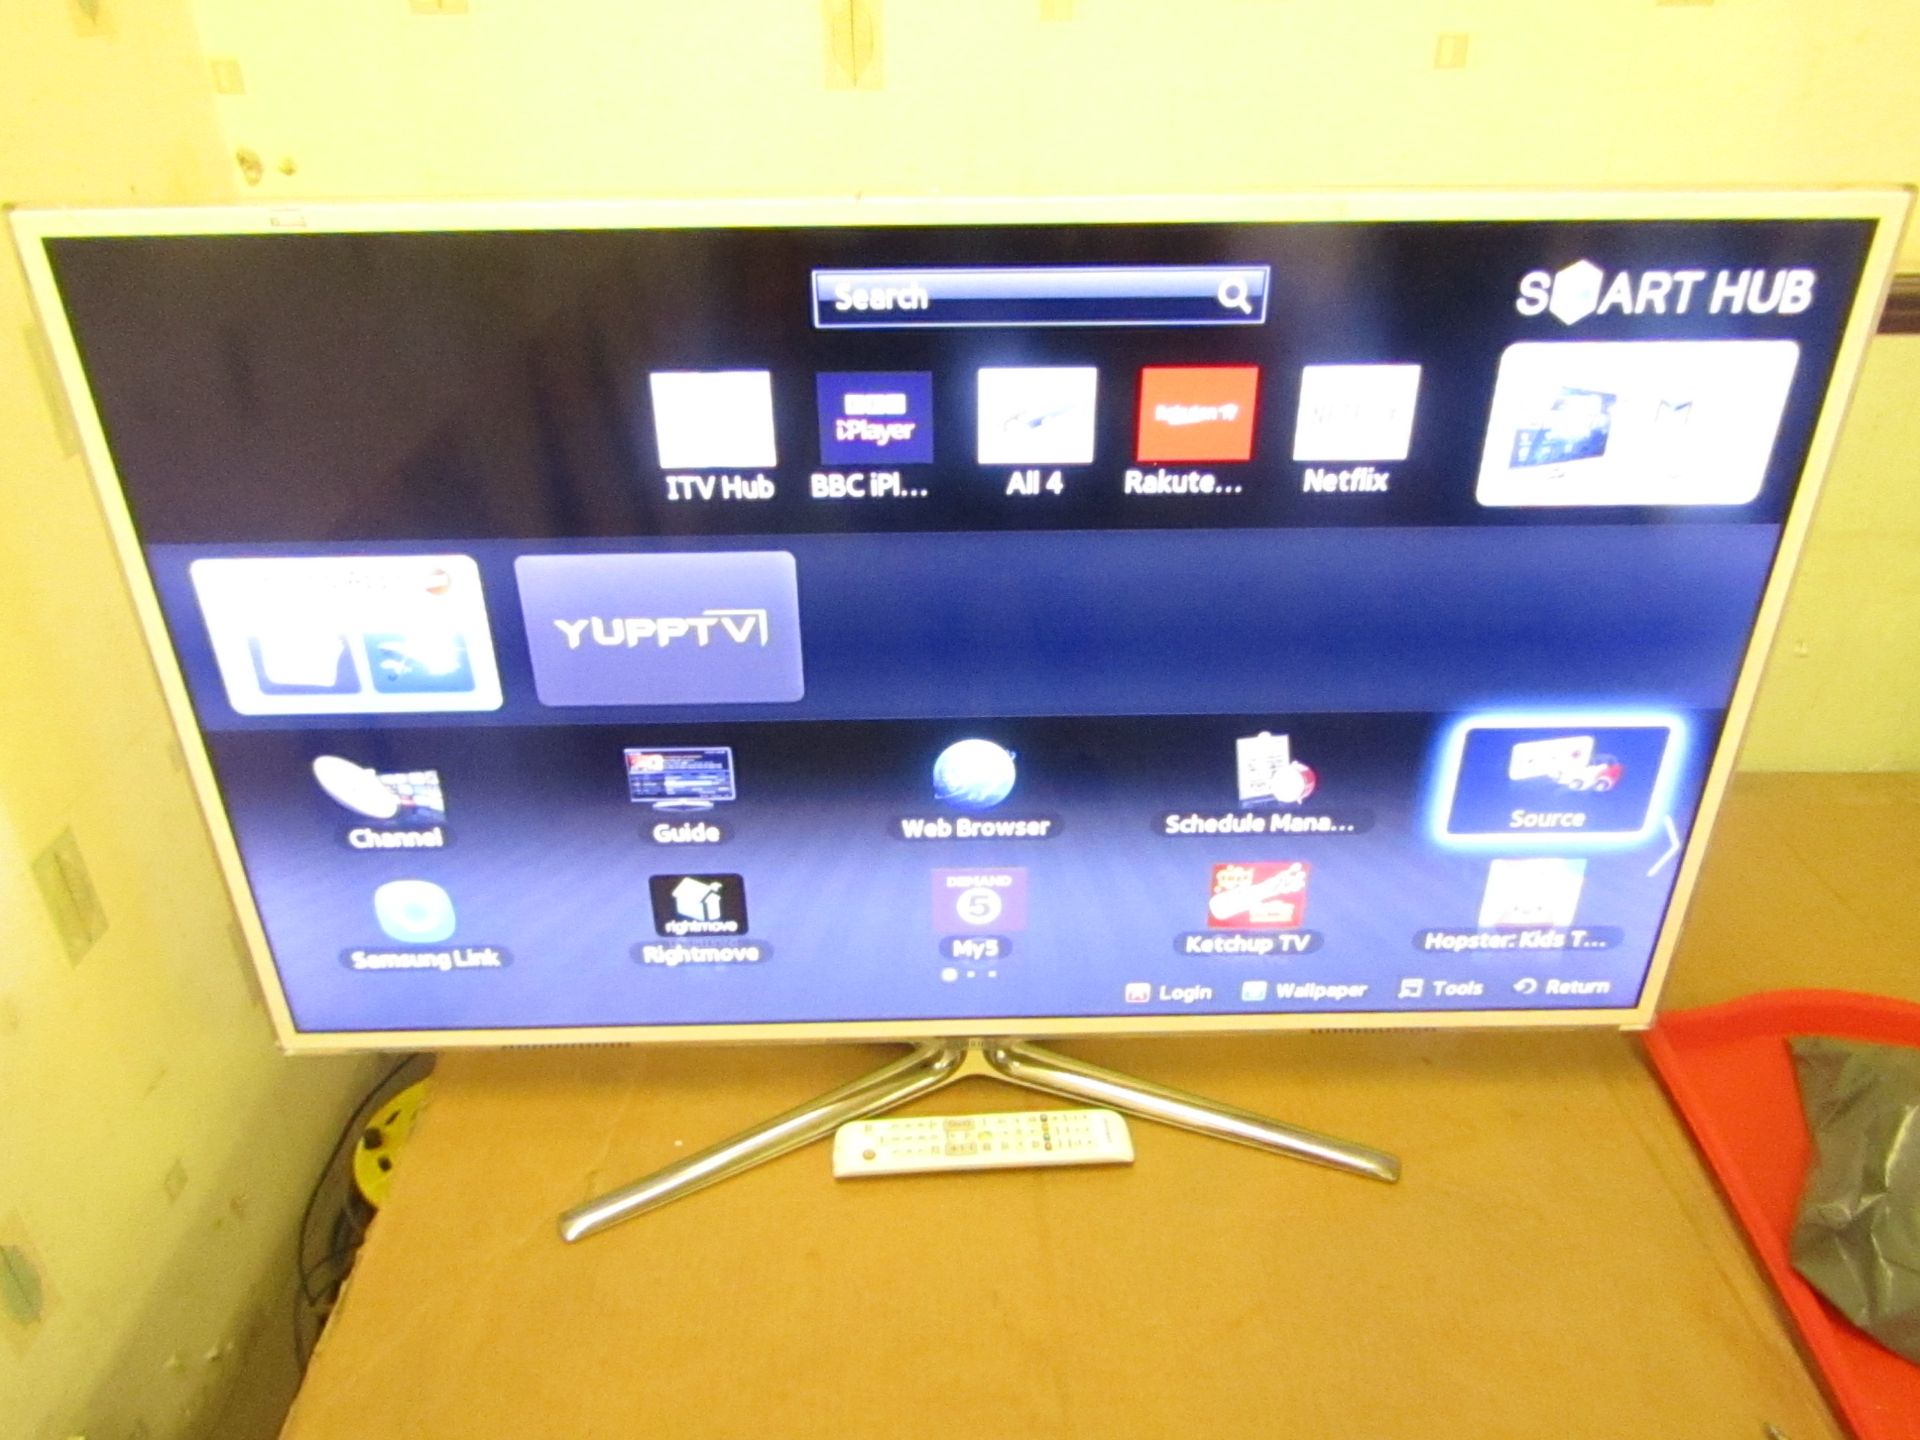 Samsung UE46ES6710 Full HD 1080p Digital Smart LED 3D TV, tested working as in it turns on and